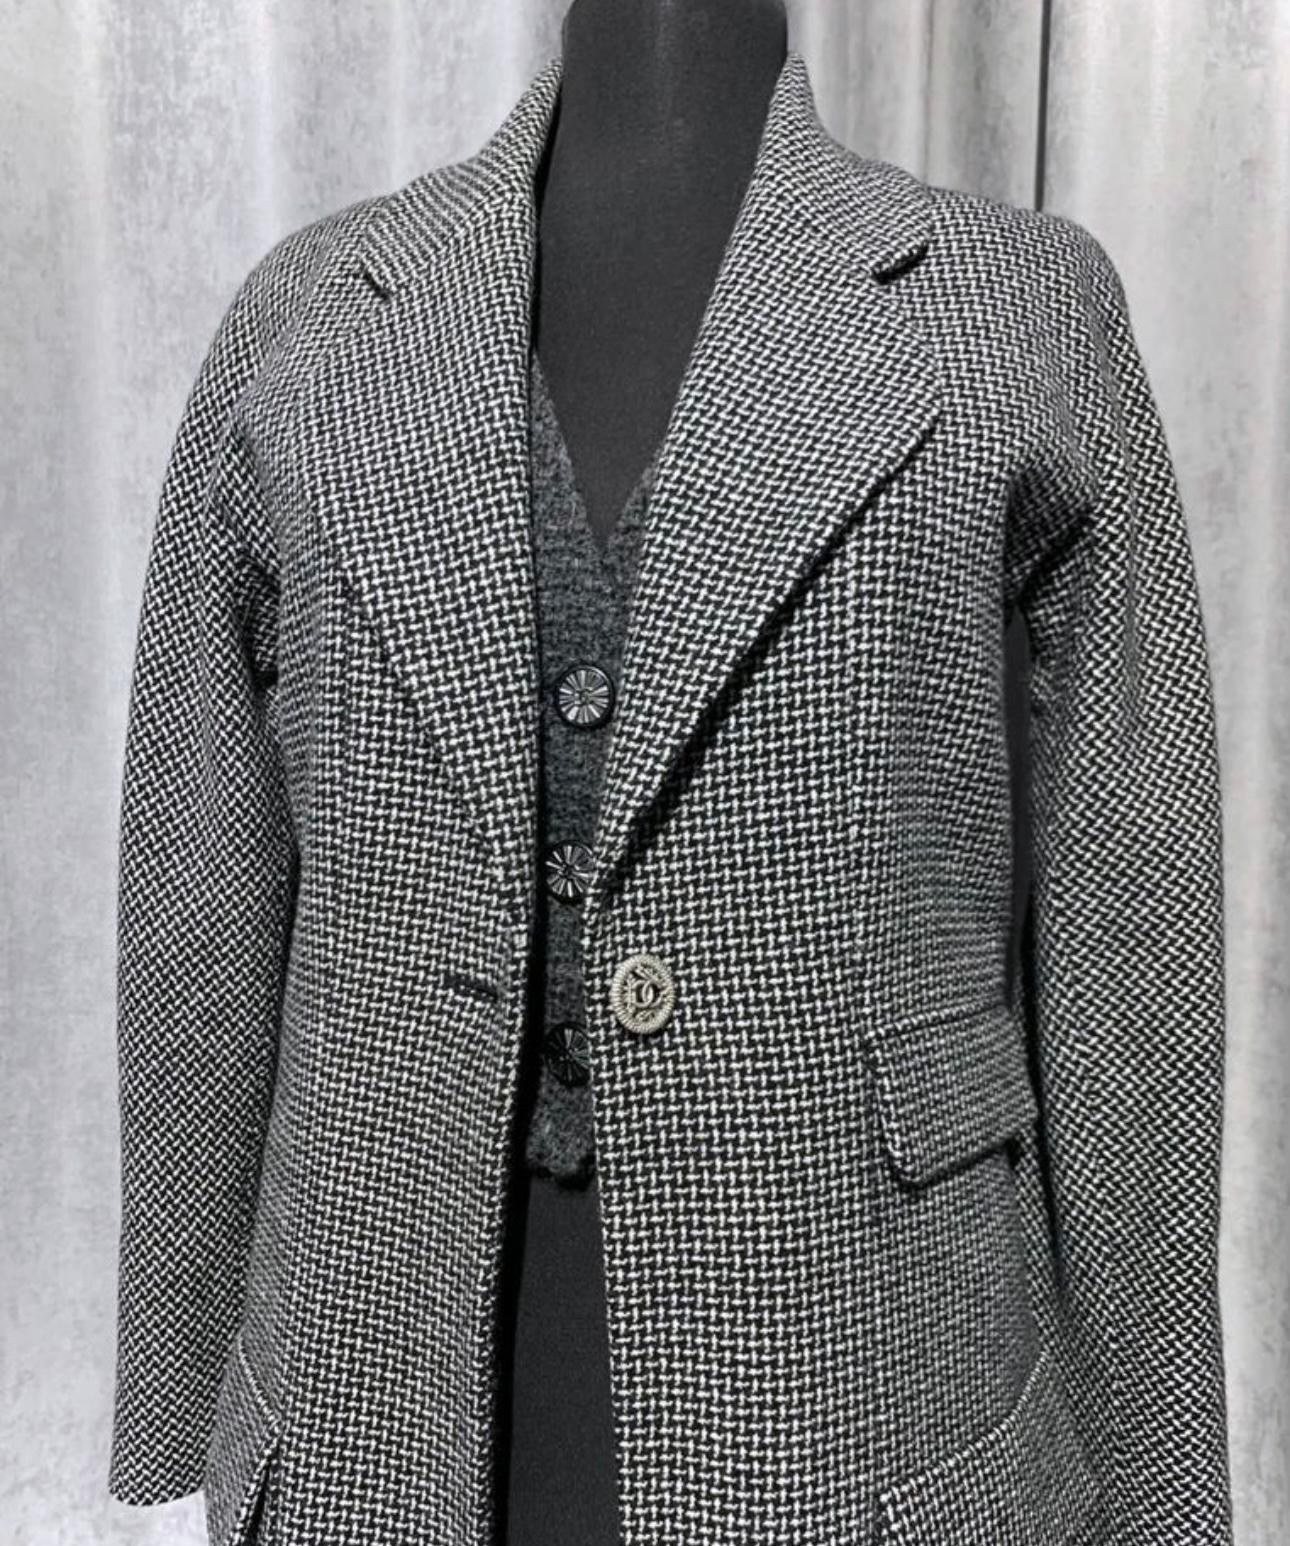 Women's or Men's Chanel New Black Tweed Jacket with CC Buttons For Sale